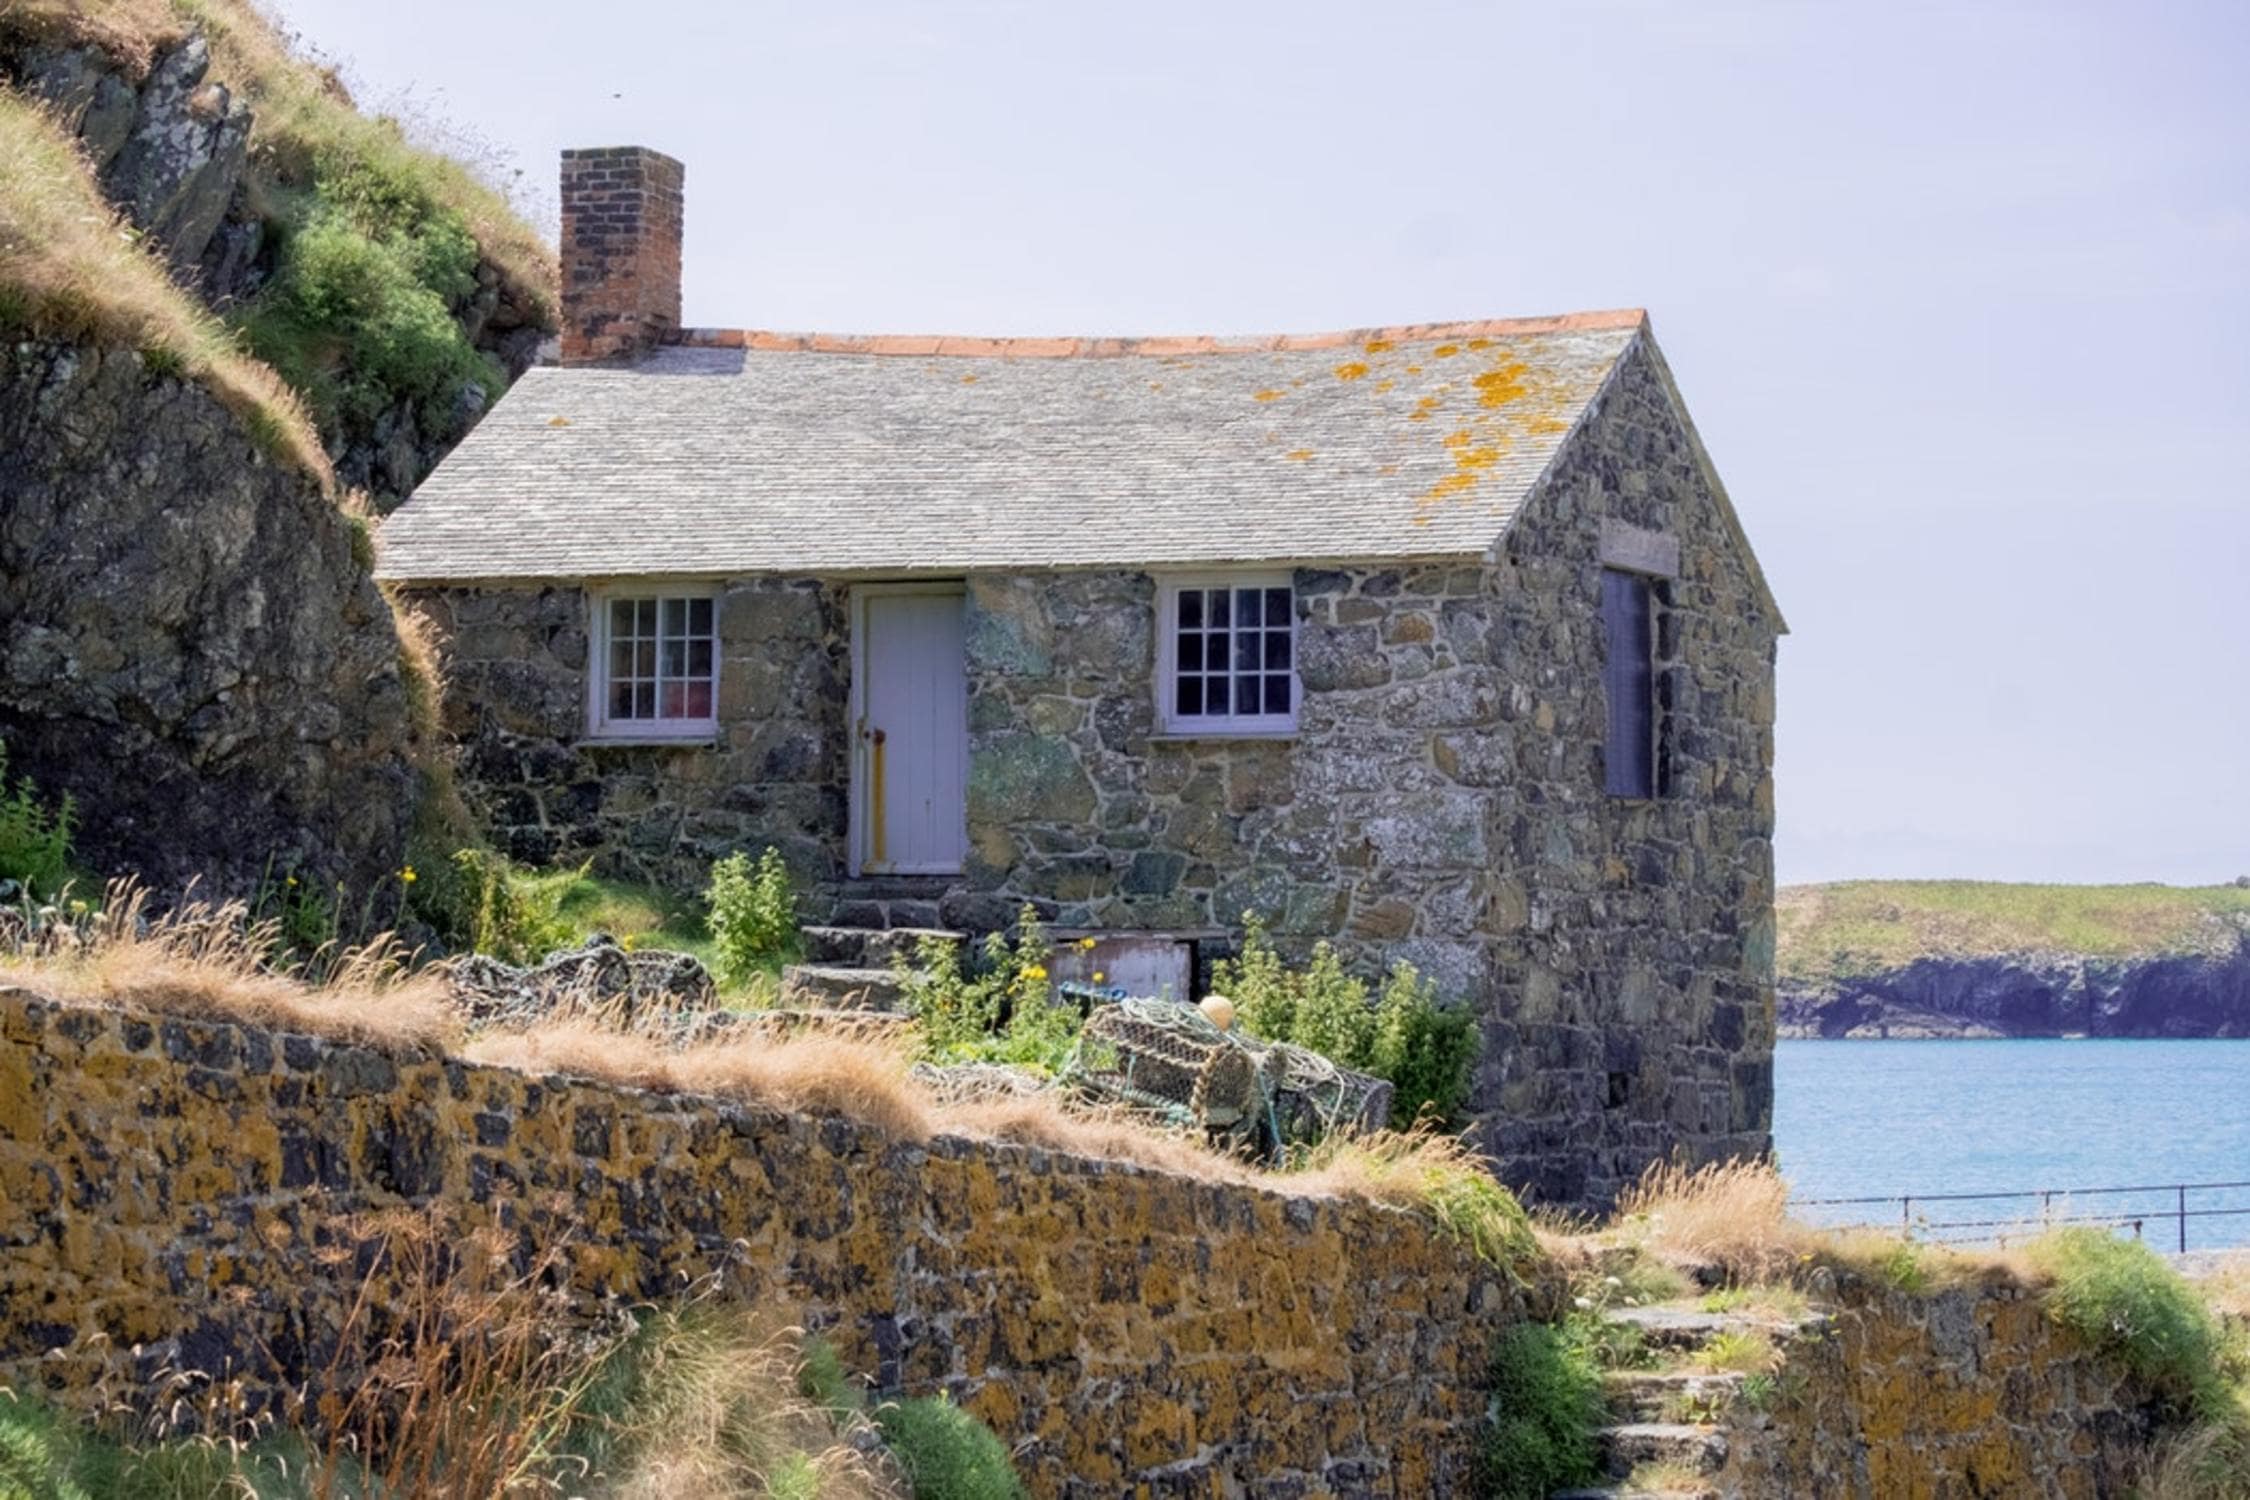 Where to seek out unique cottages